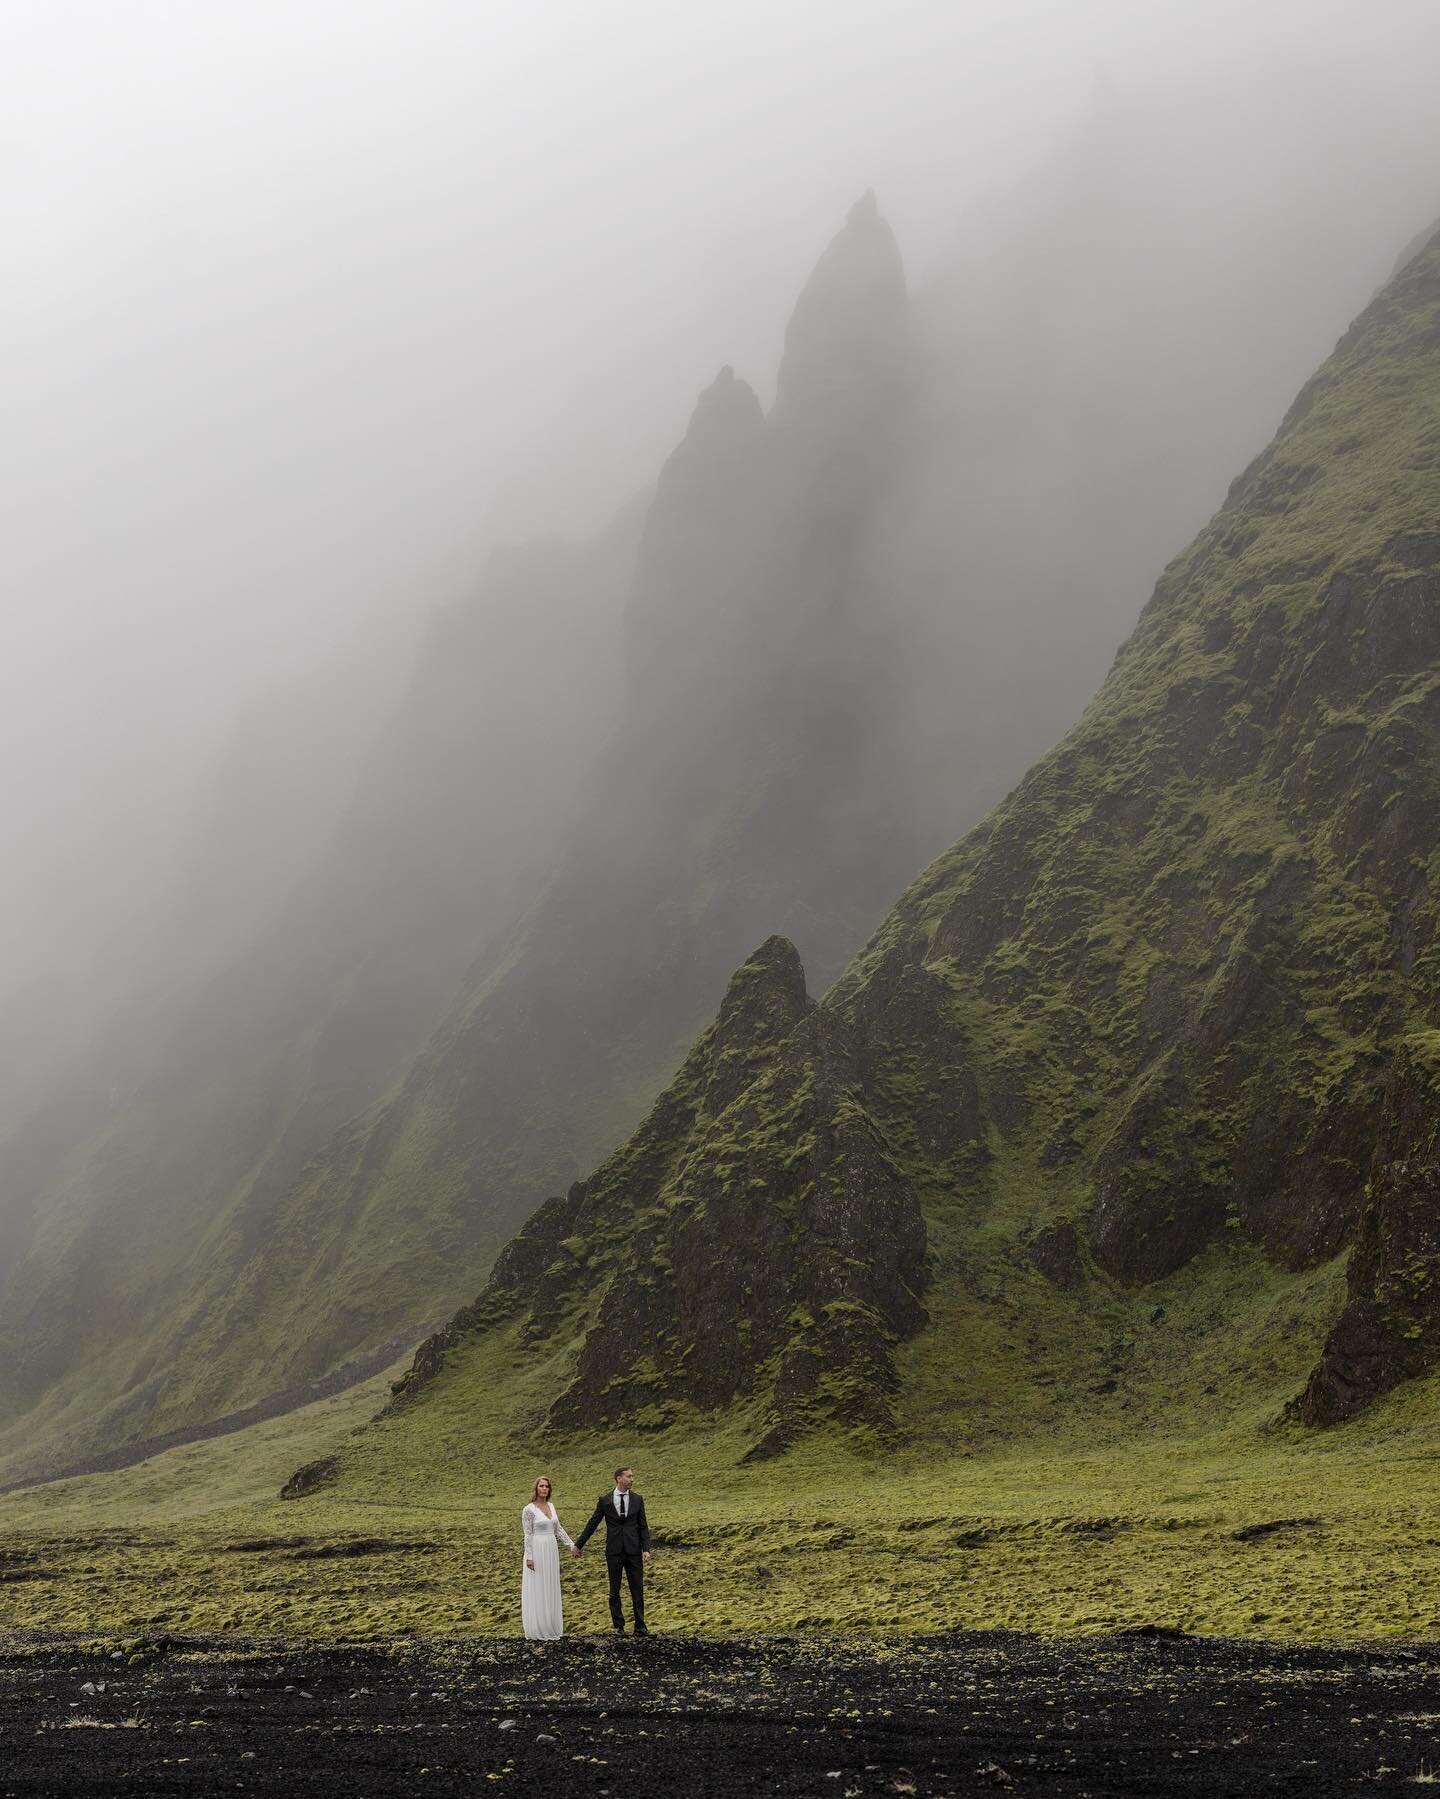 I&rsquo;m a sucker for moody foggy shoots! Time seems to stop, everything is so quiet, and adds such a cool misty veil to the landscape. 

Bride: @thefallontimes
Groom: @kevmillurrr
Videographer: @forevermorefilms
Shot second shooting for @tylerrye_
